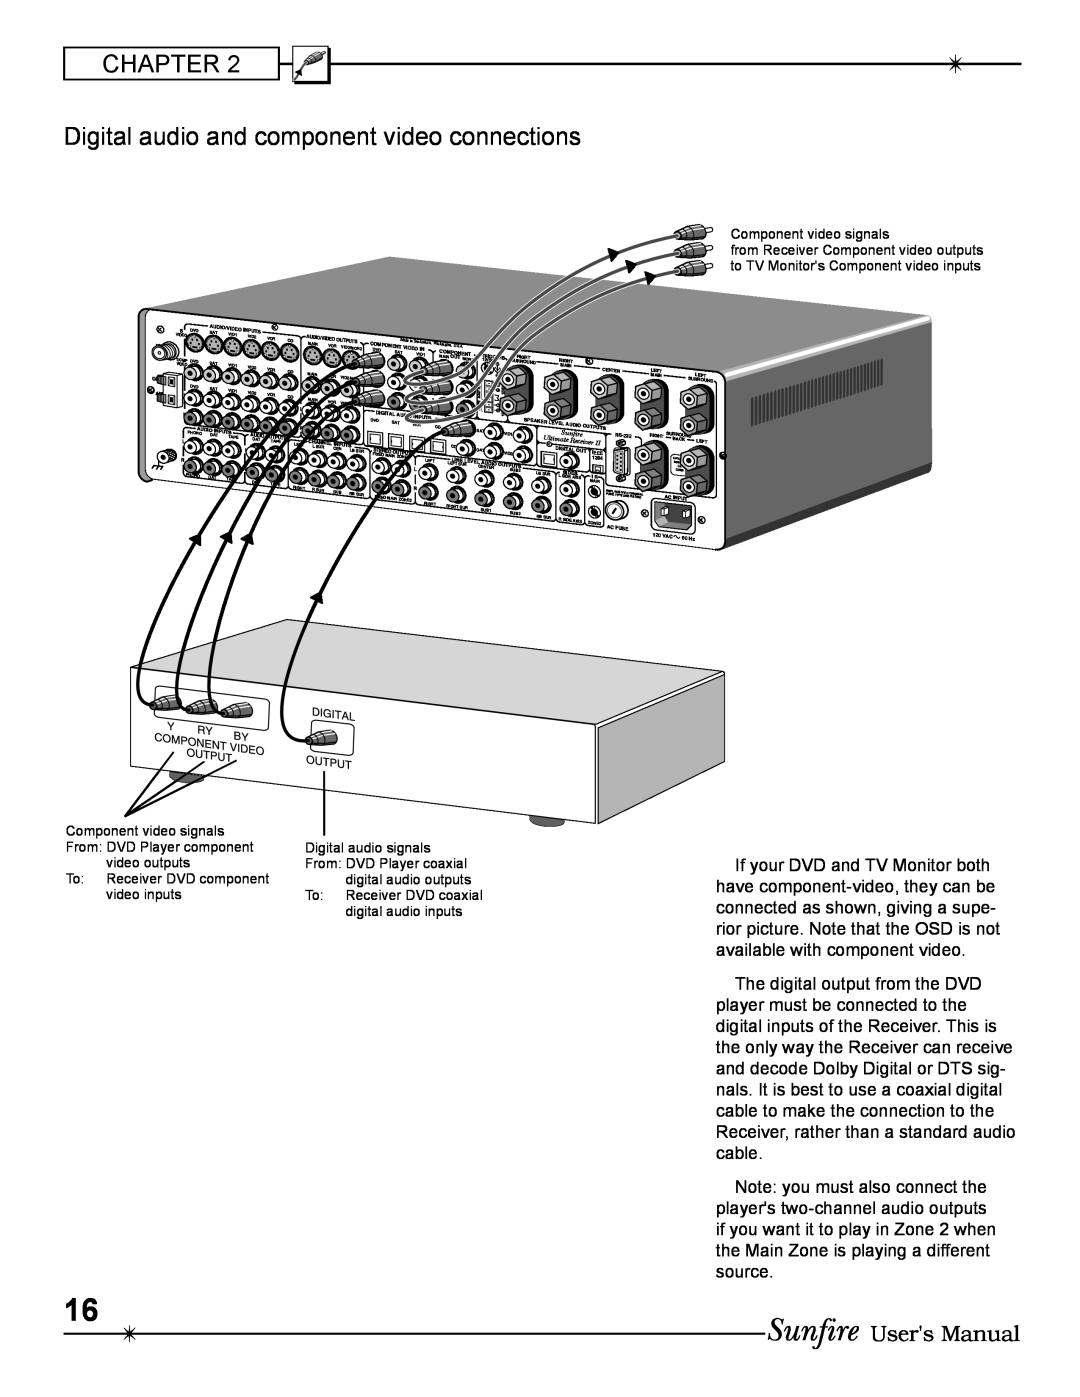 Sunfire Radio manual Chapter, Digital audio and component video connections 